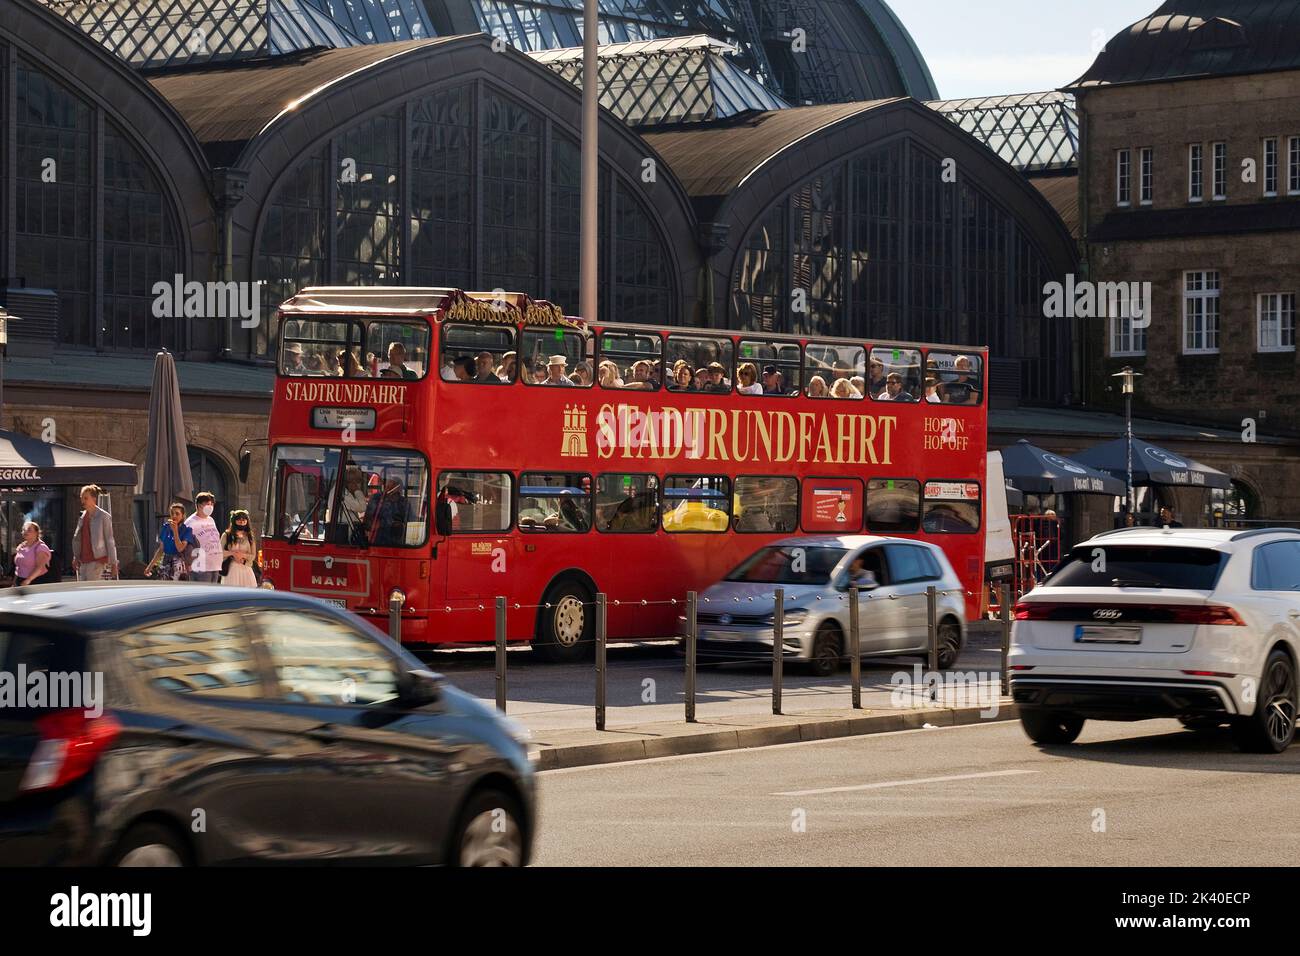 red double-decker bus in front of the main train station, city tour, Germany, Hamburg Stock Photo